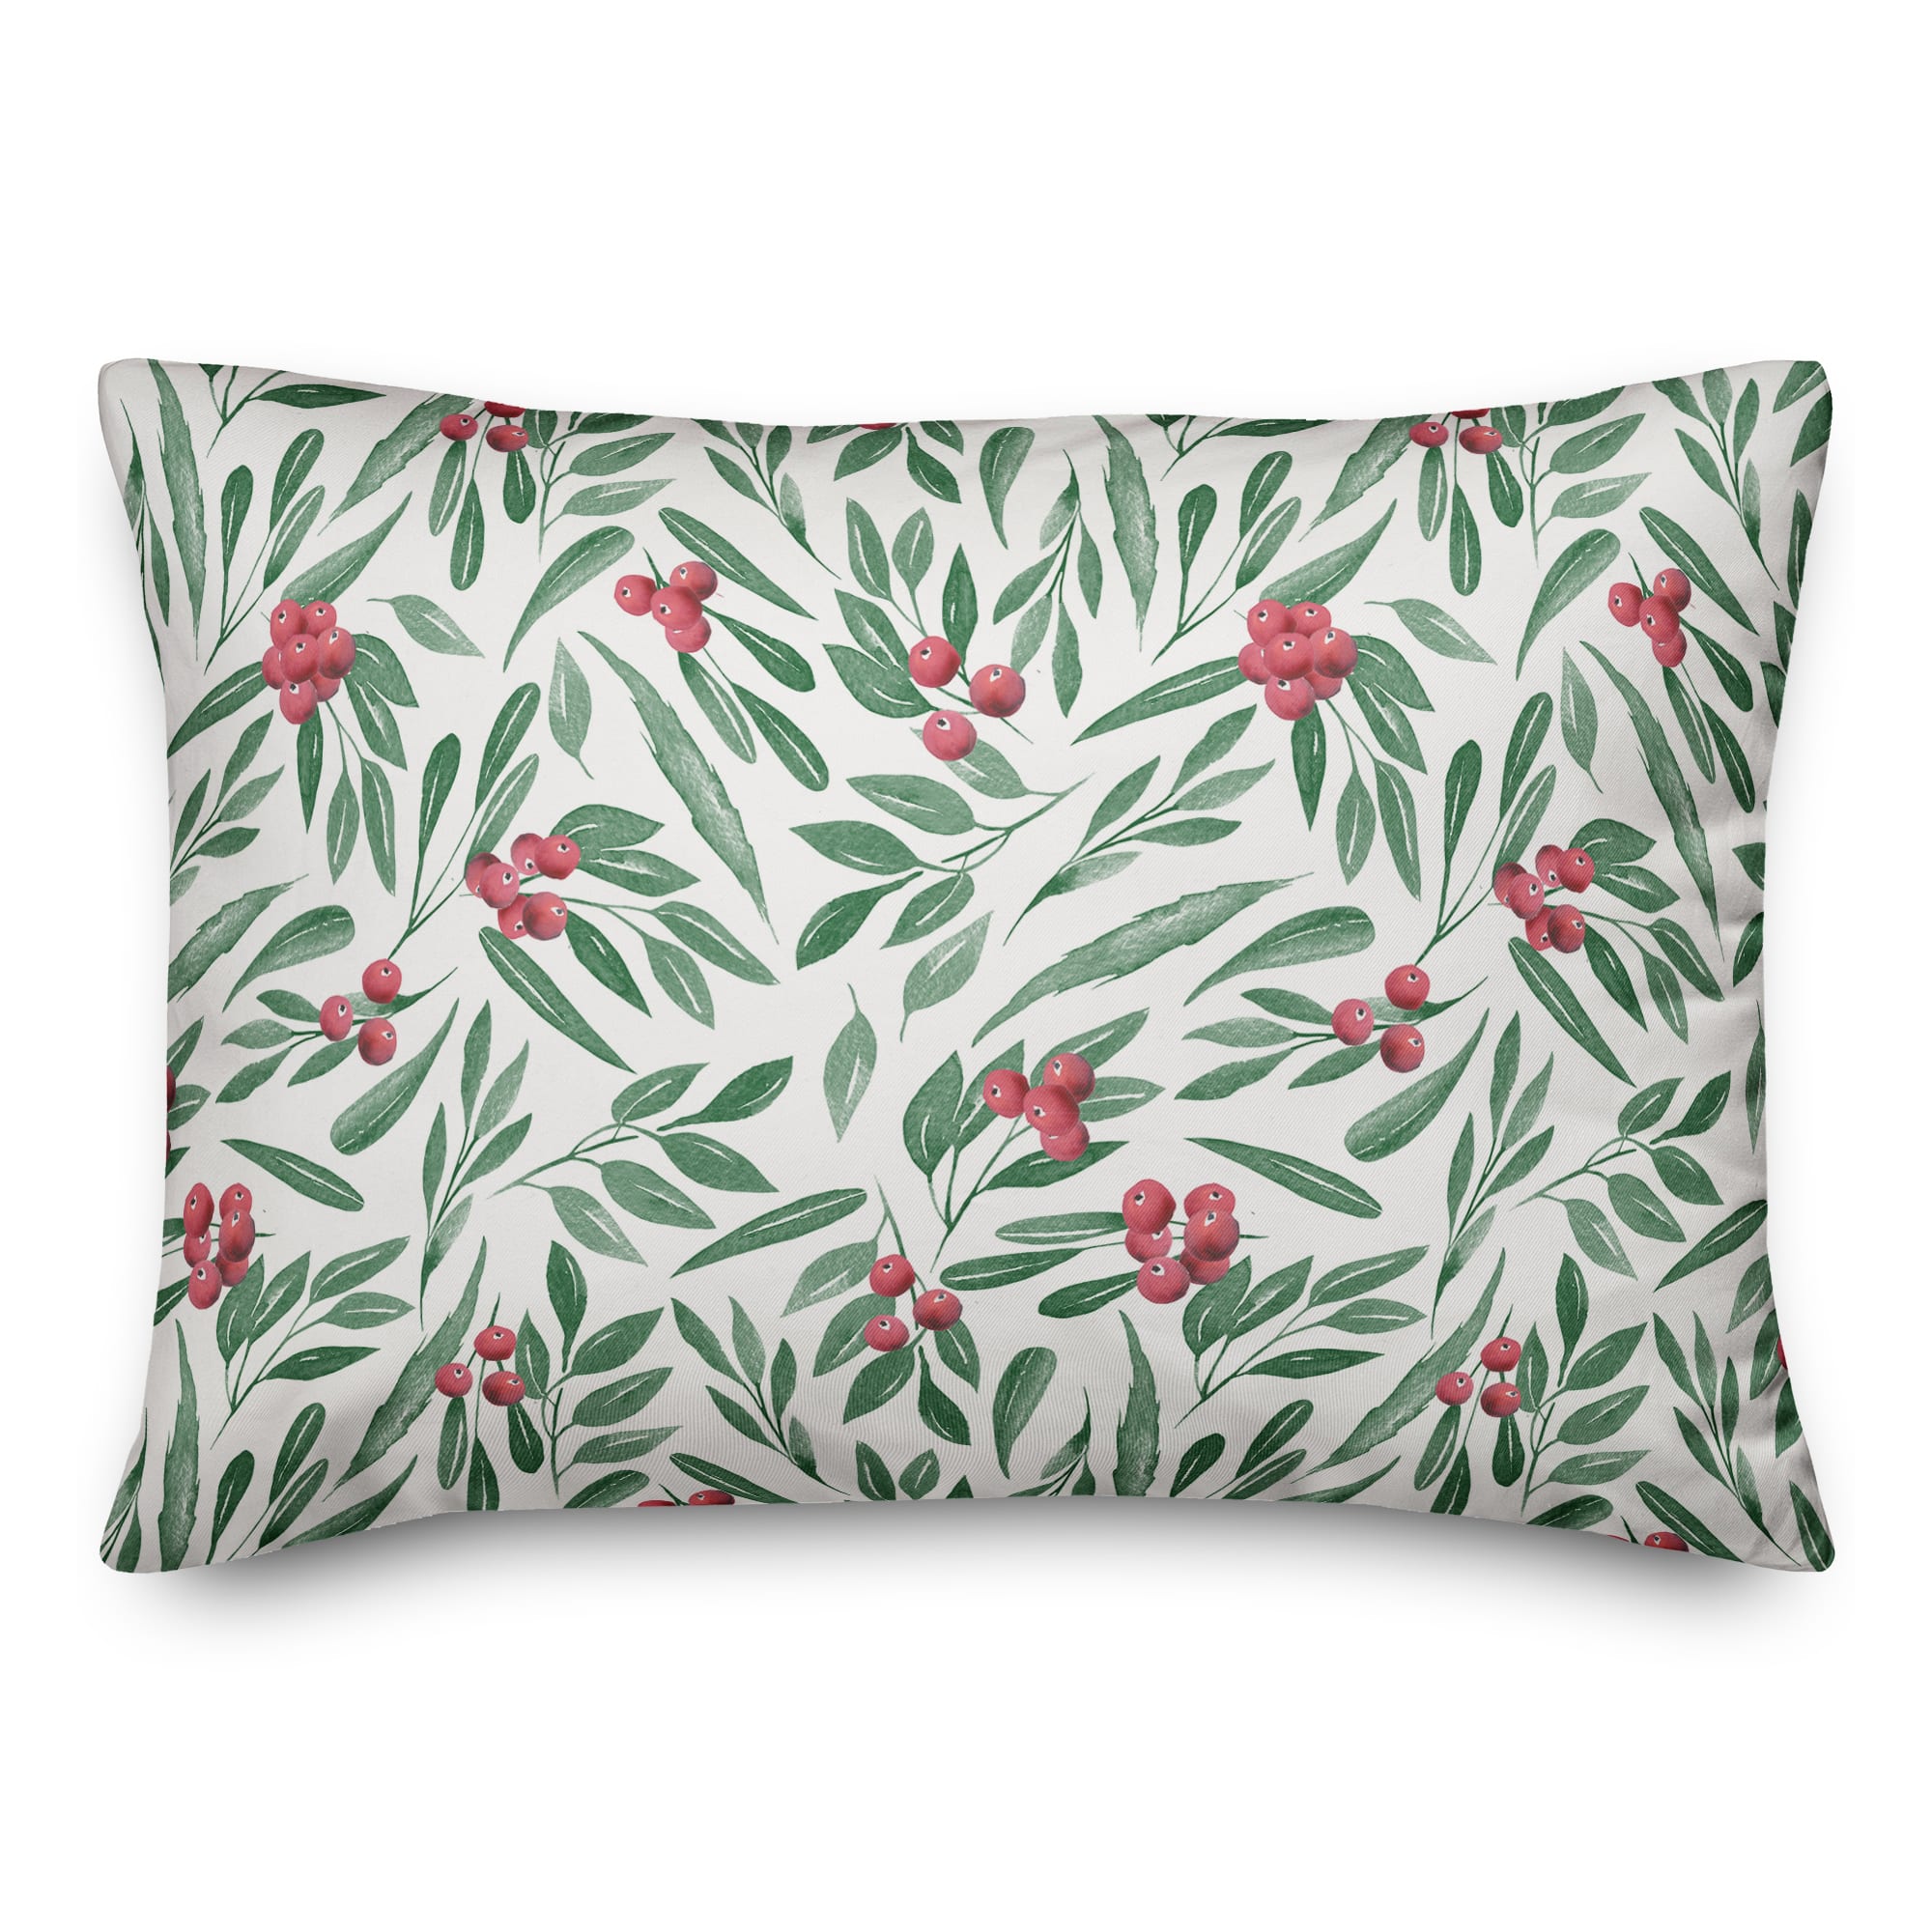 Holly Berries 14x20 Throw Pillow